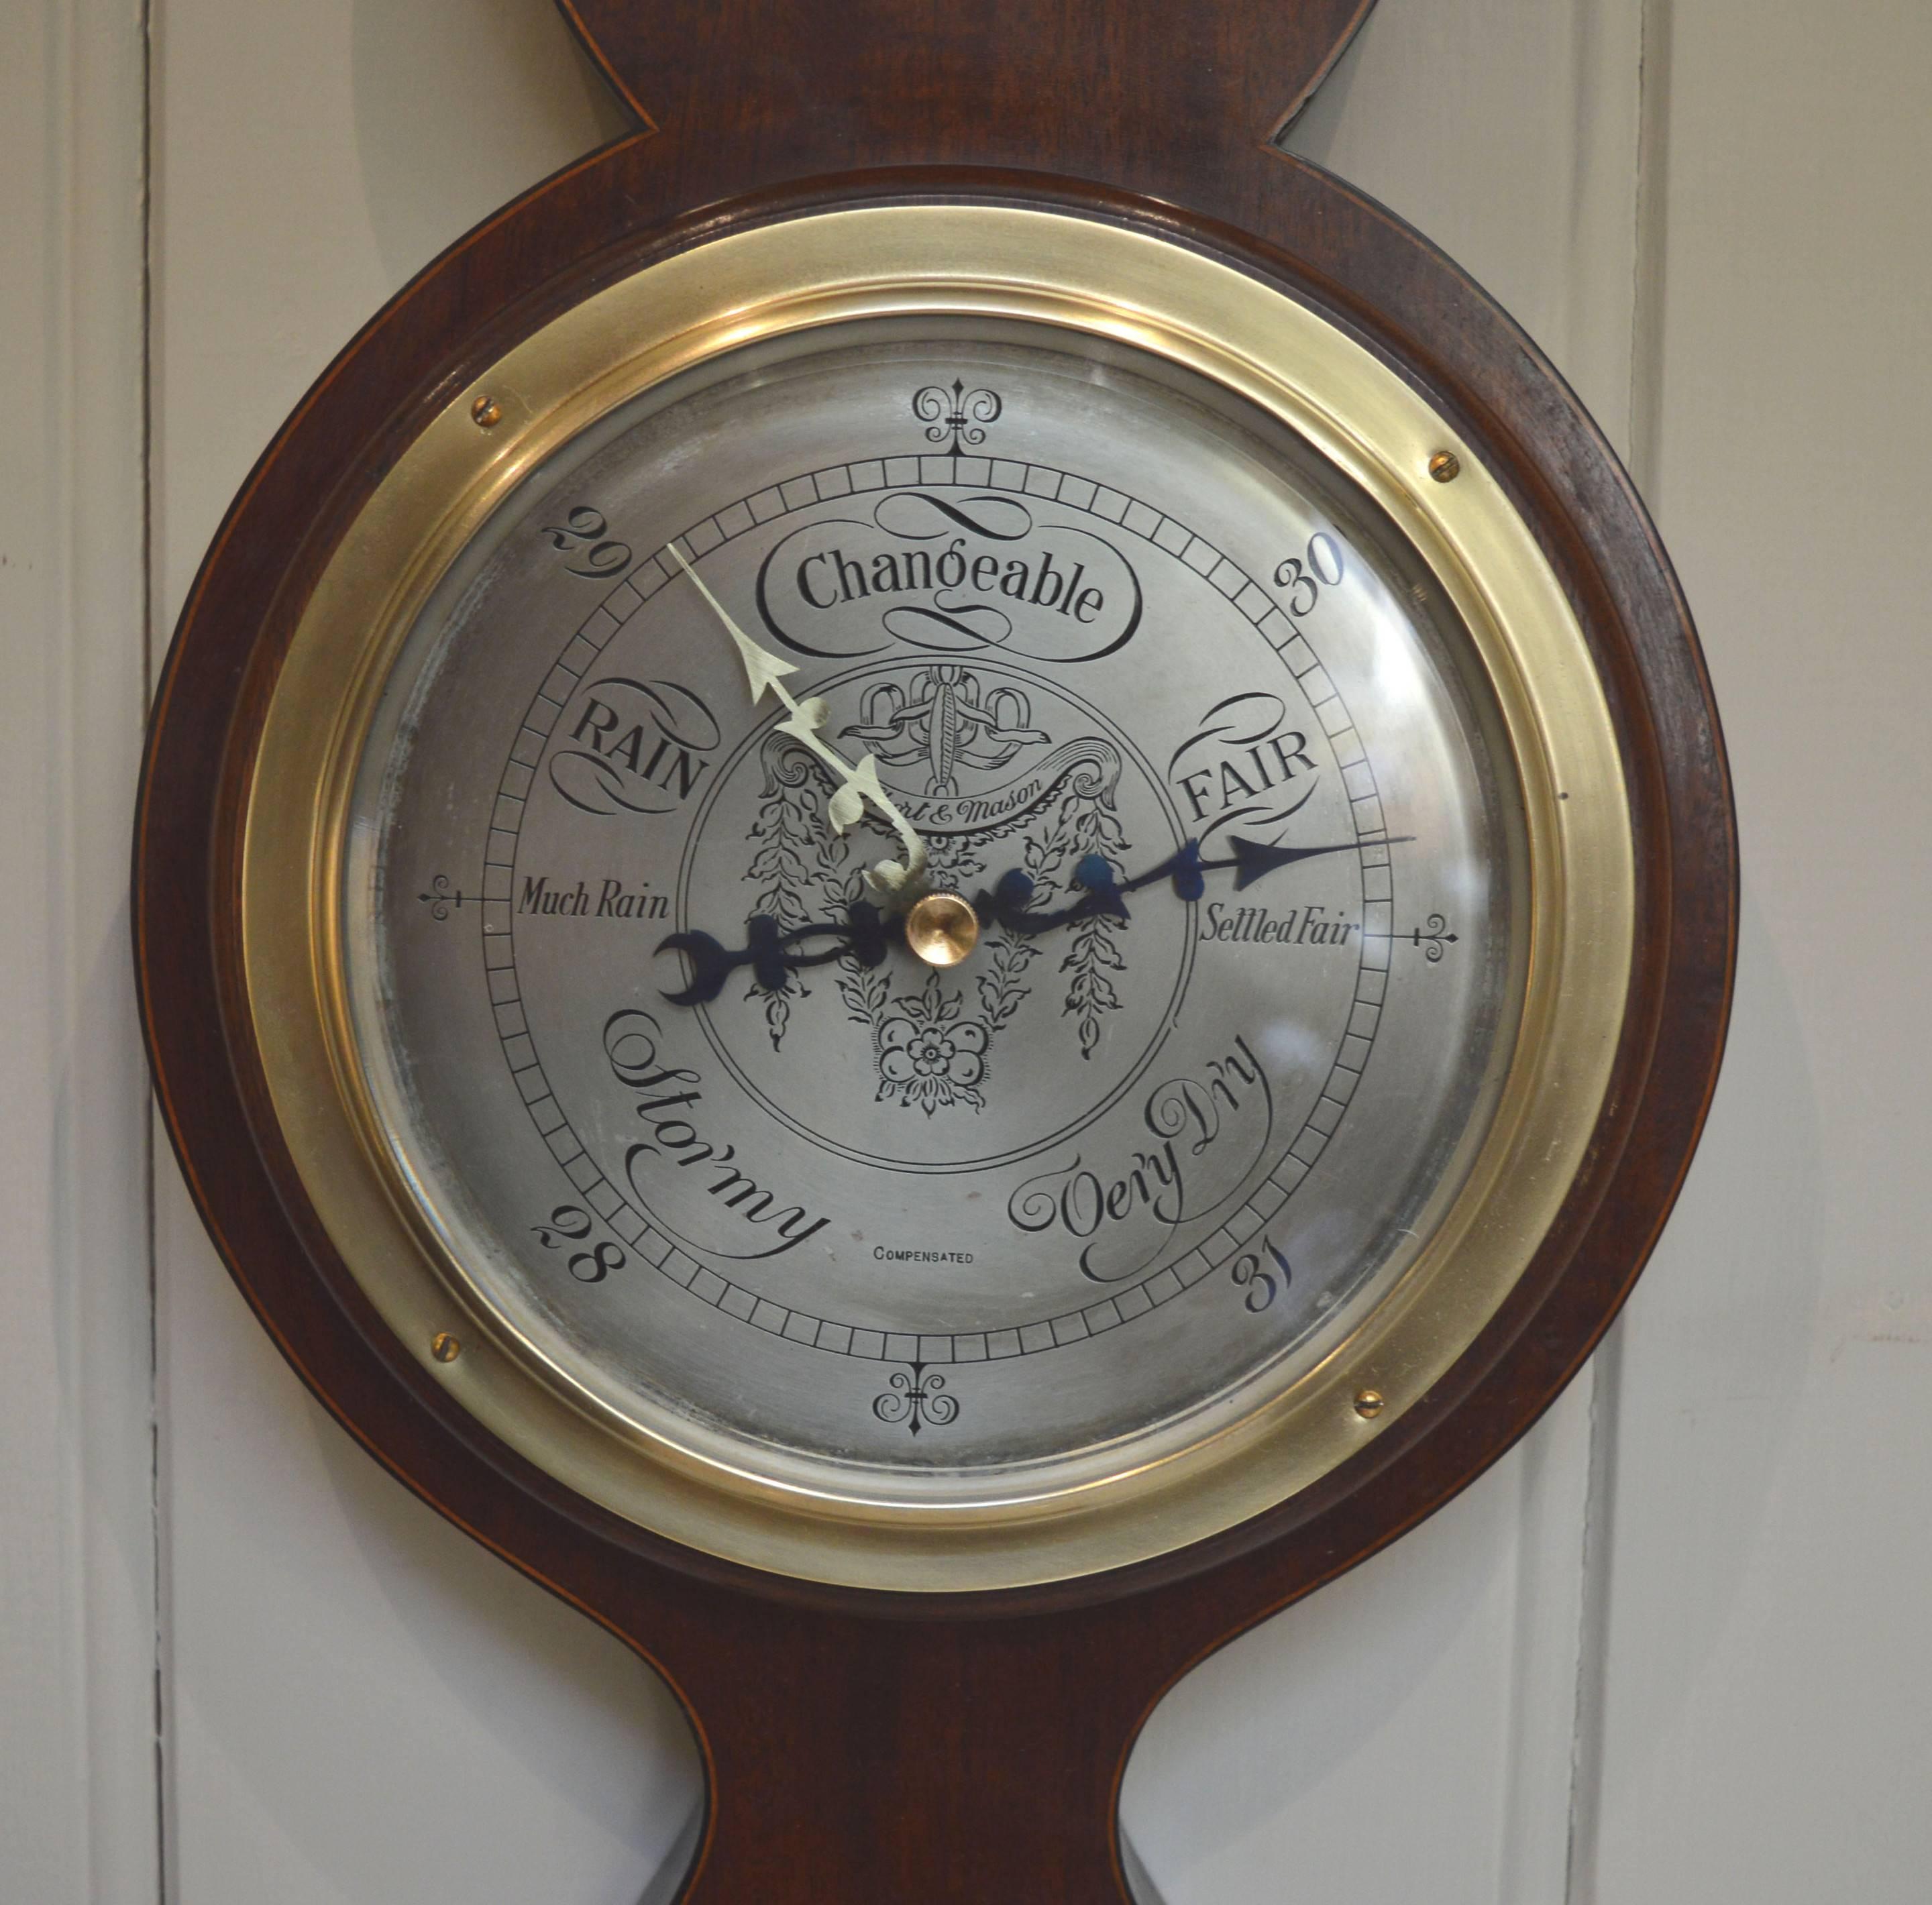 A solid mahogany android banjo barometer. Its case is inlaid with inlaid satinwood floral panels and n architectural pediment with a brass finial. It has a brass bezel and an engraved silvered dial signed by the makers Short and Mason of London. It